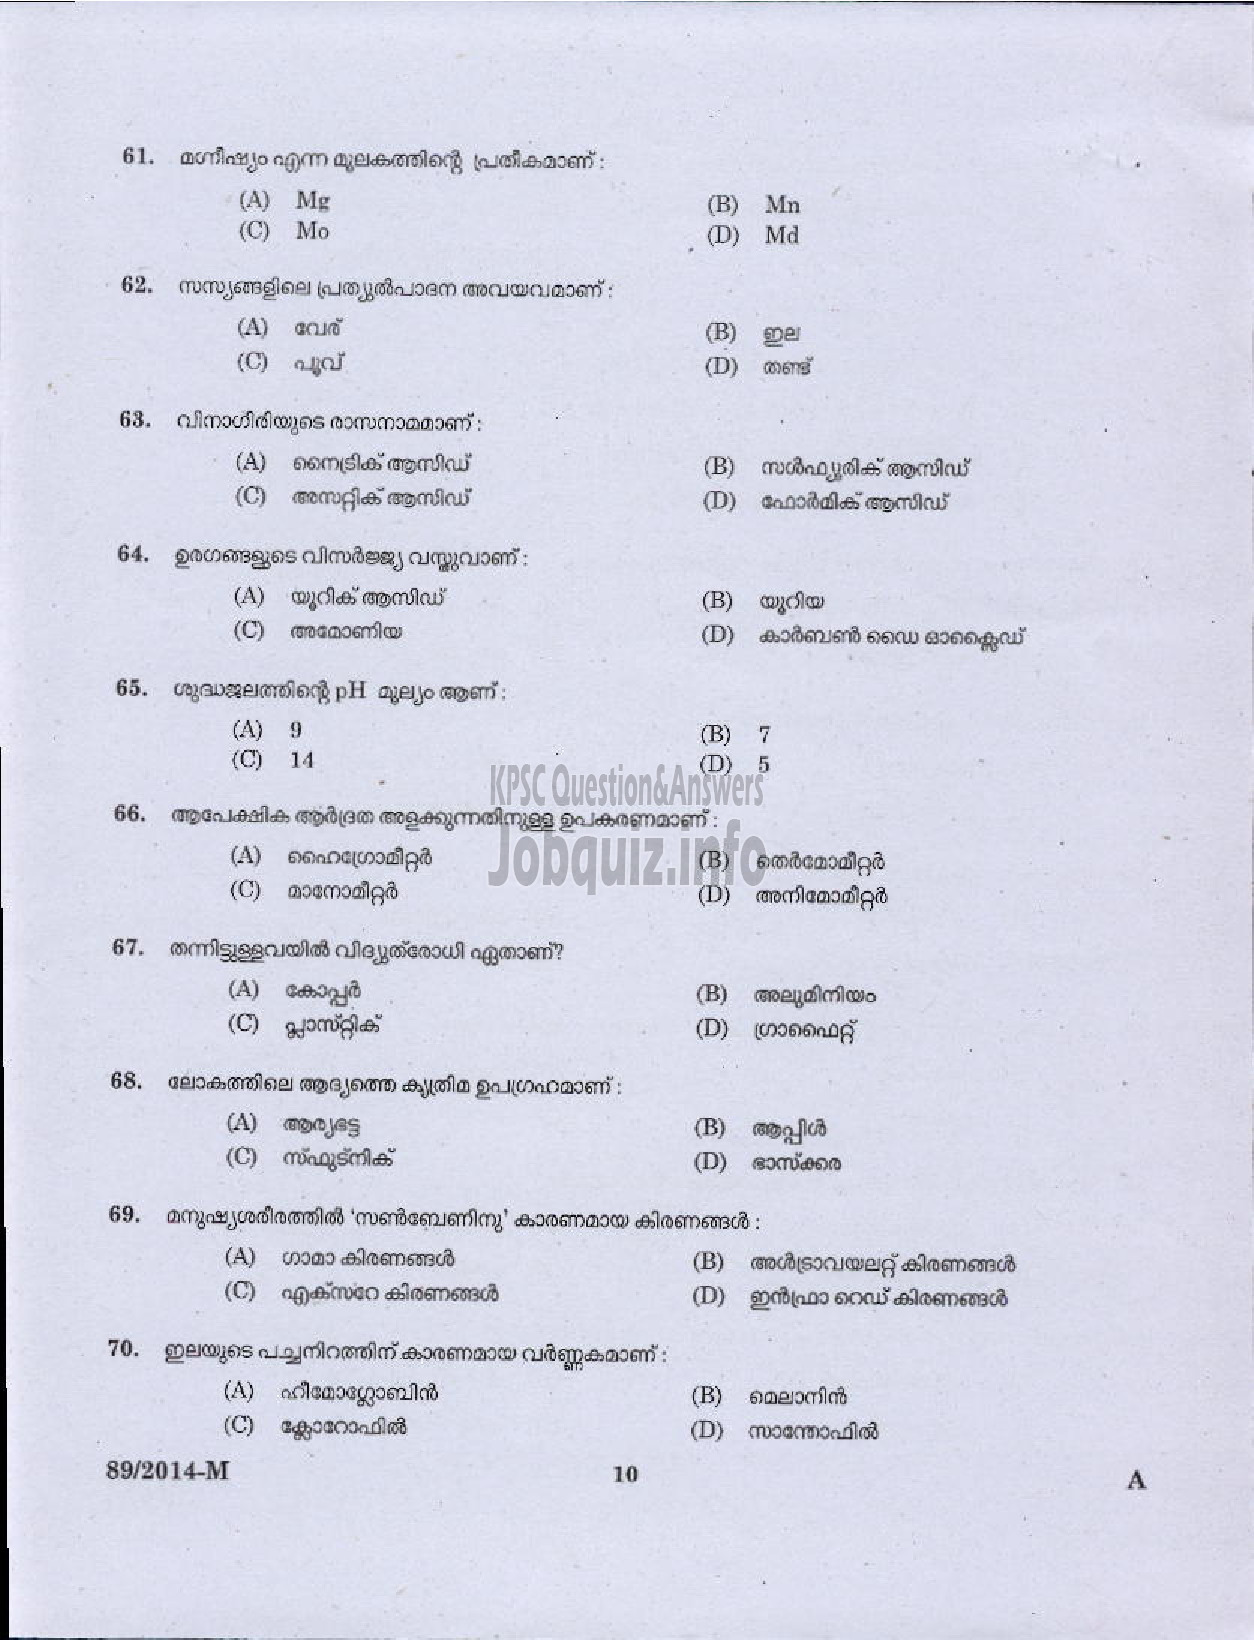 Kerala PSC Question Paper - ATTENDER SR FOR ST ONLY TCC LTD AND LGS NCA OBC VARIOUS KTYM ( Malayalam ) -8